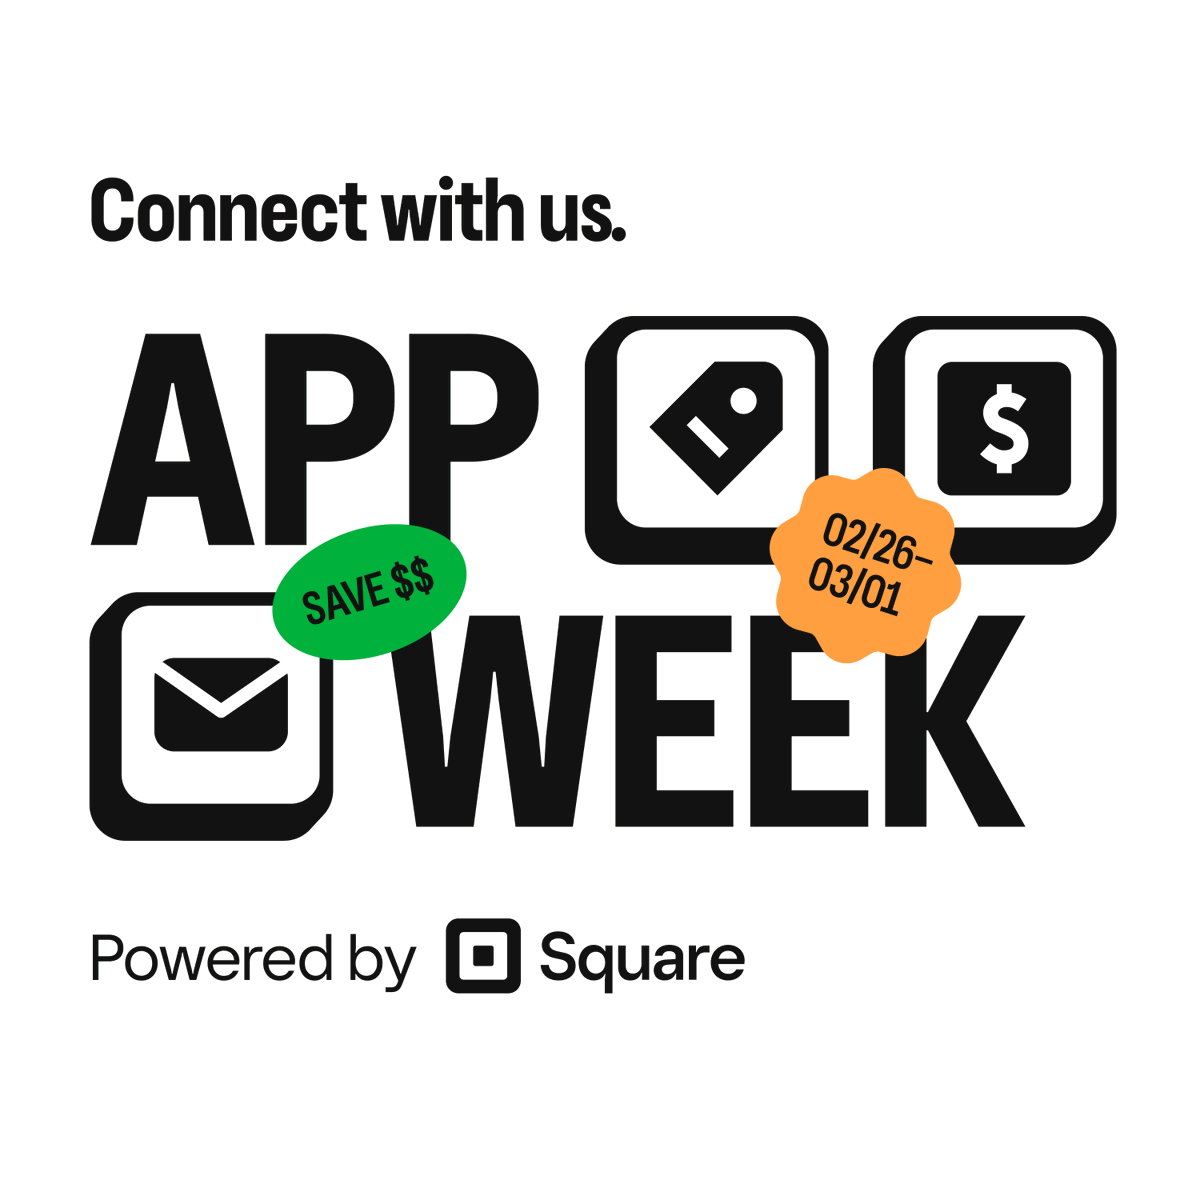 Boost business without breaking the bank. 🚀 Explore the @Square App Marketplace to find loads of apps for basically everything your business needs. And during App Week? Find loads of them on sale. 🛍️ #SquareAppWeek